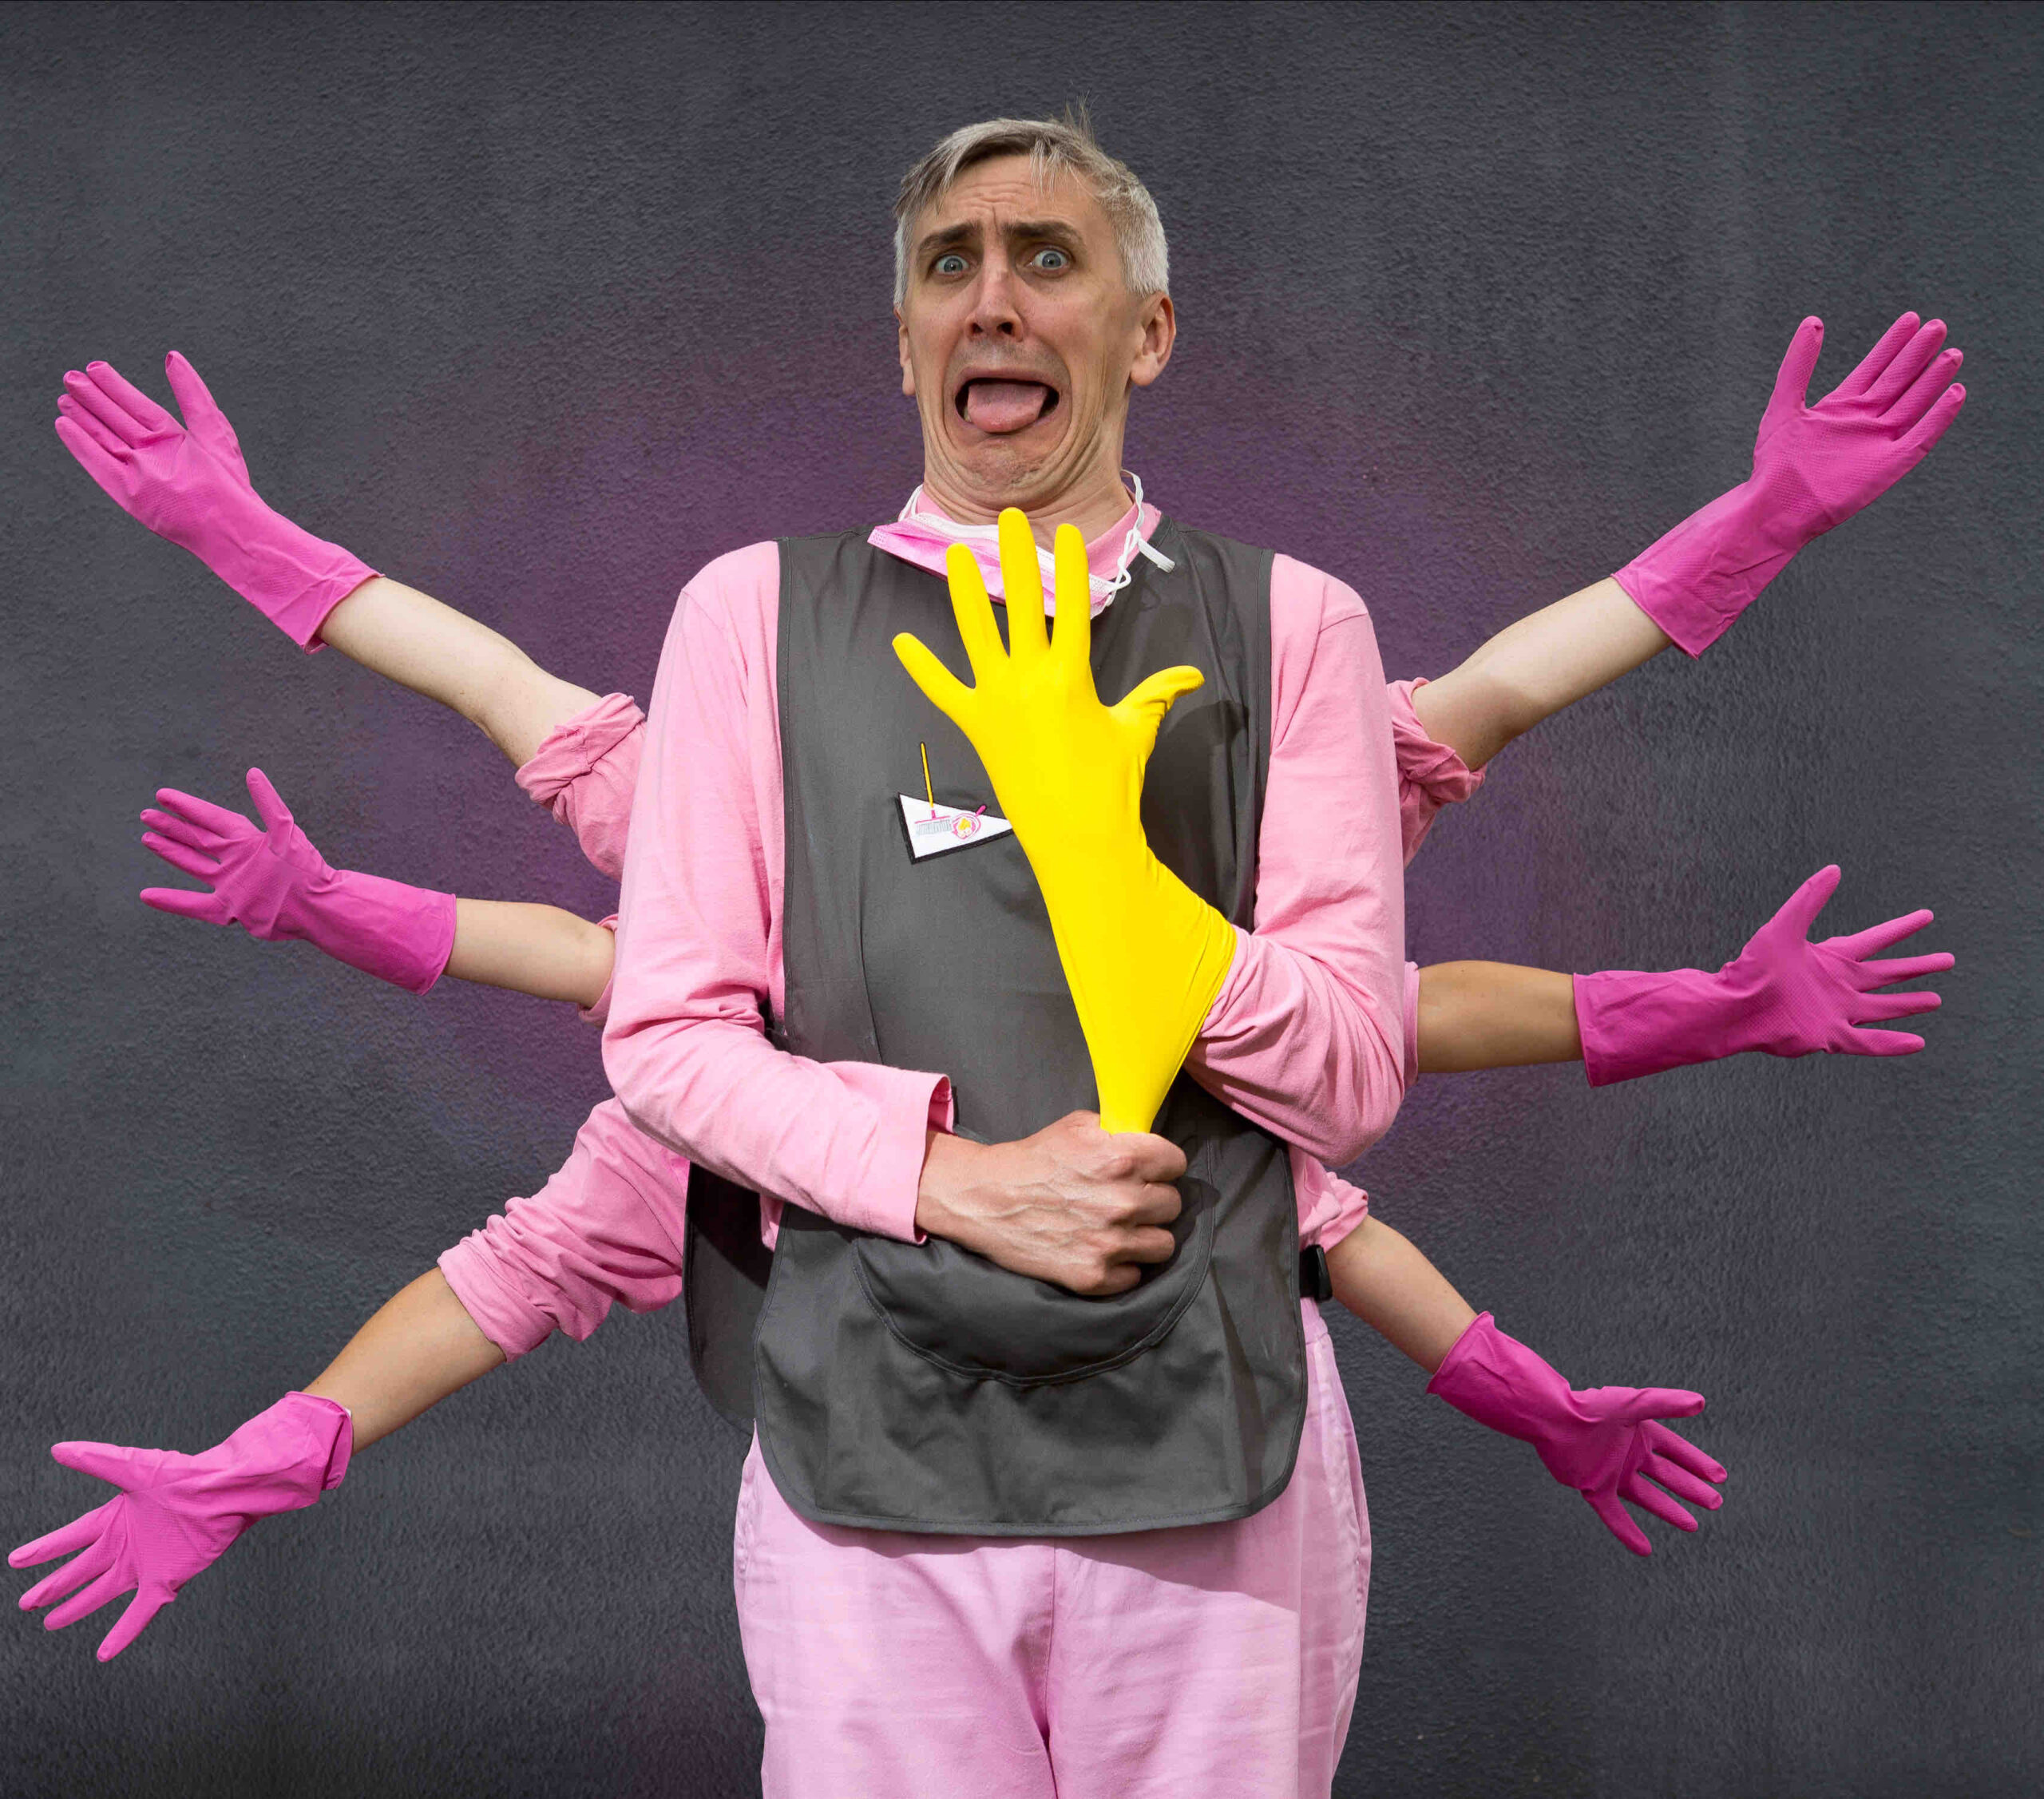 The Chief is standing against the grey painted wall and is wearing a pink t shirt and trousers with a grey tabard over the top. He is pulling a yellow rubber glove onto his hand in front of his body, and his face seems like a mixture of surprise and disgust. Behind him, the other characters’ arms fan out on either side. They are all wearing pink rubber gloves.